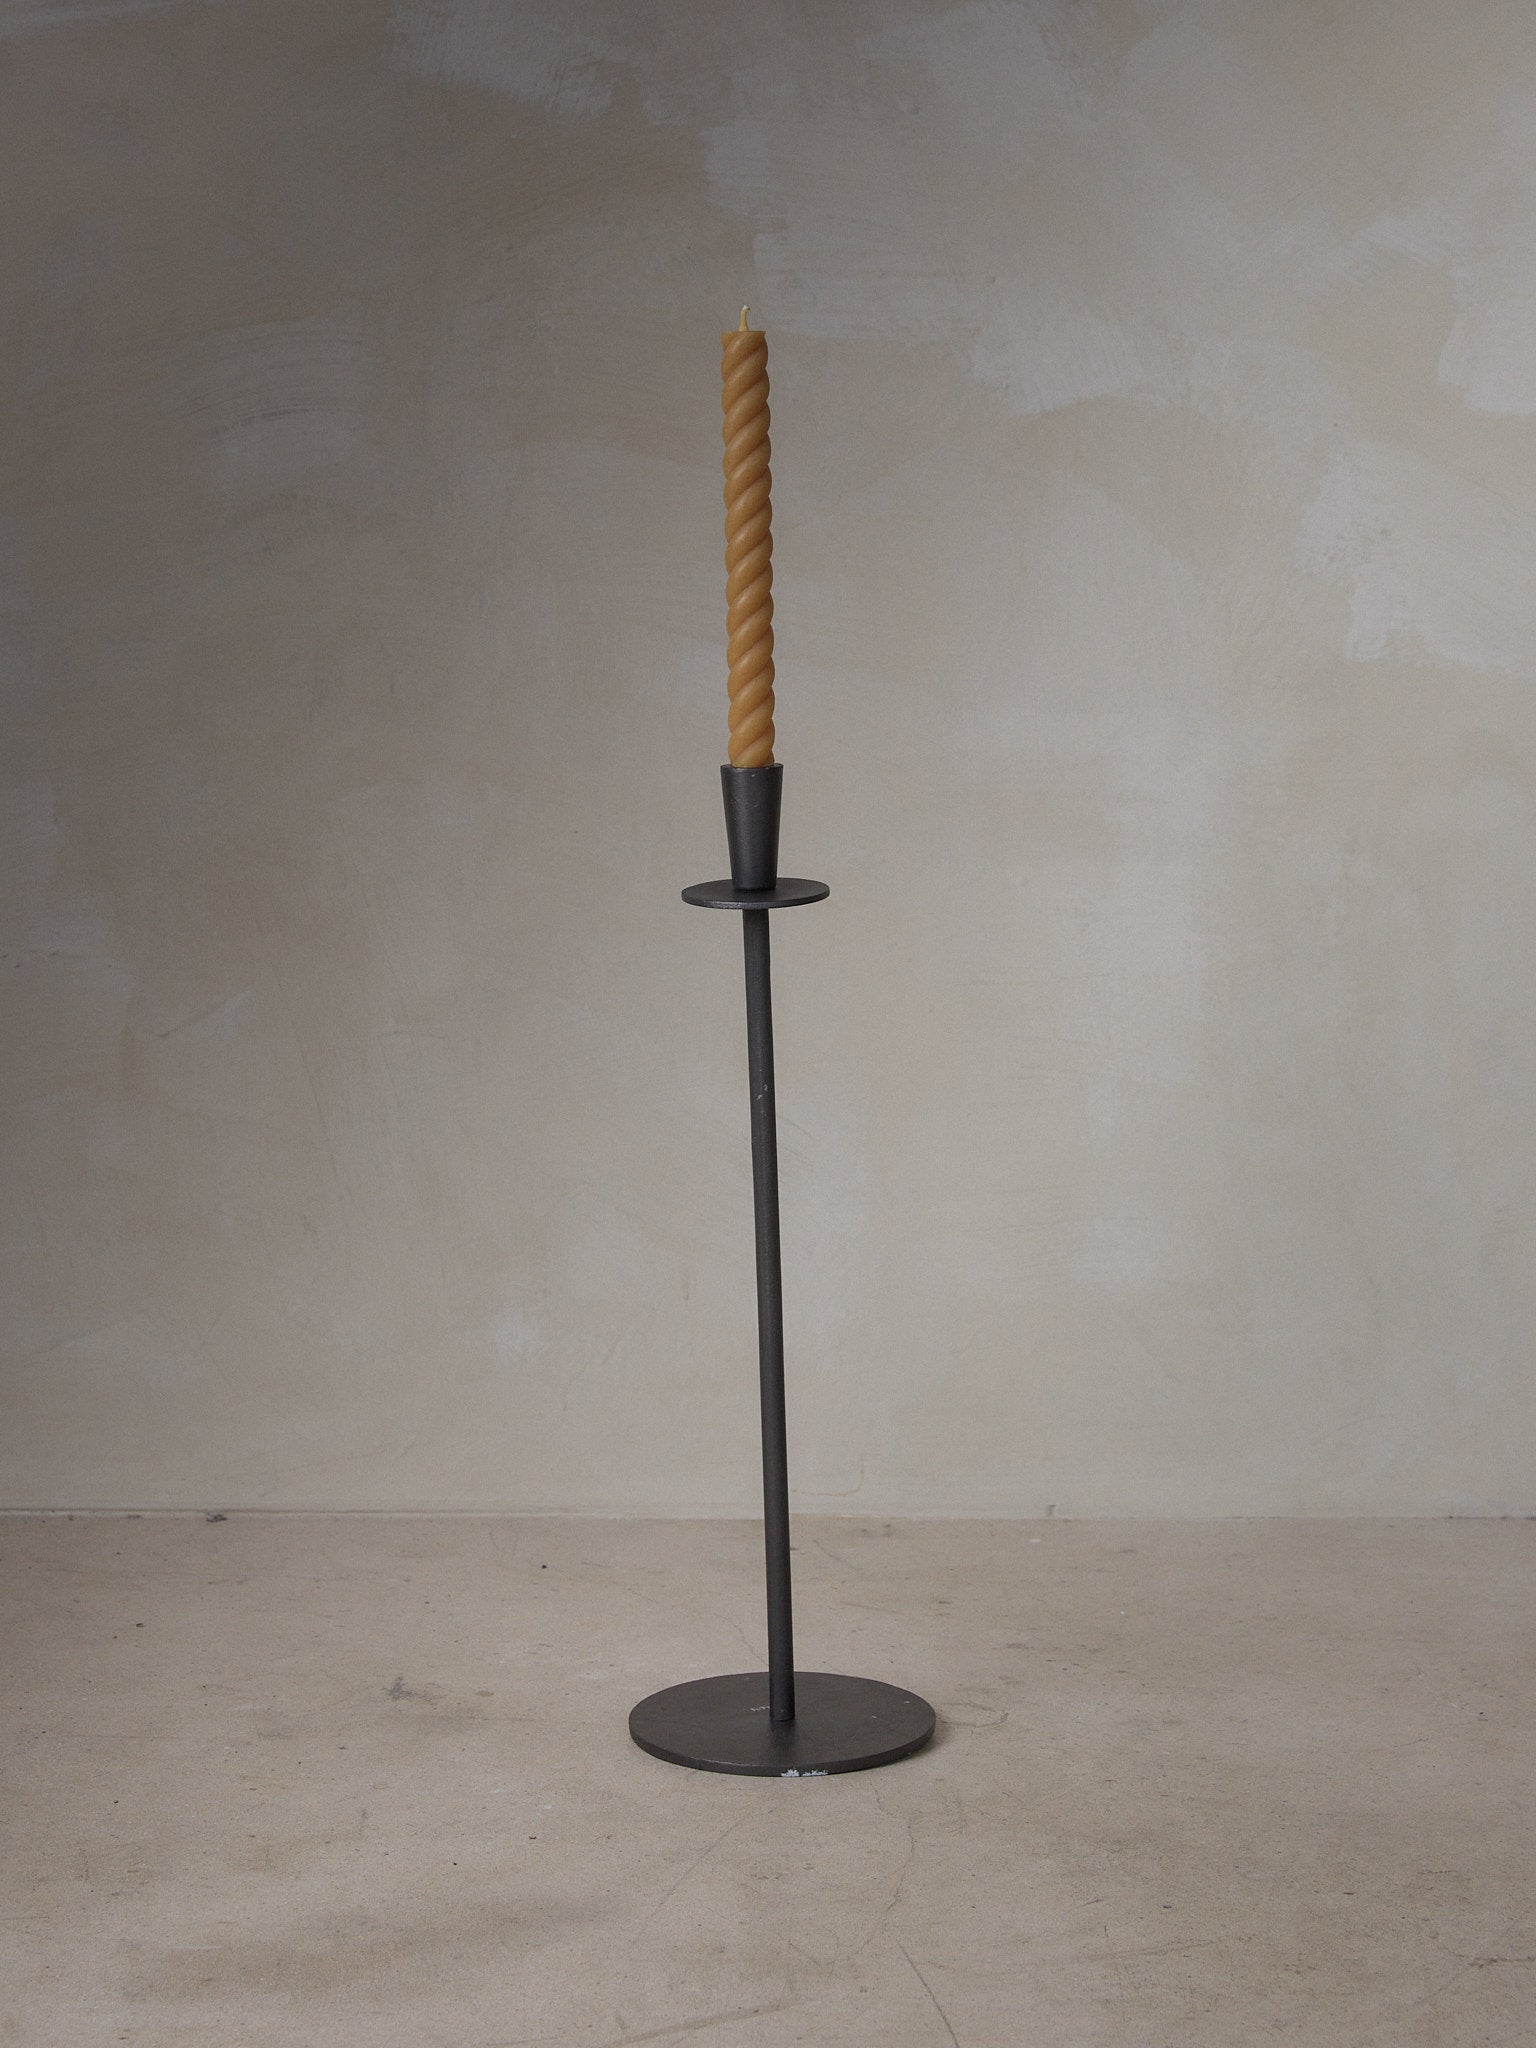 Hoy Casted Candle Holder. Tall, slim, elegant candle holder in black cast aluminum with a raw, matte finish.